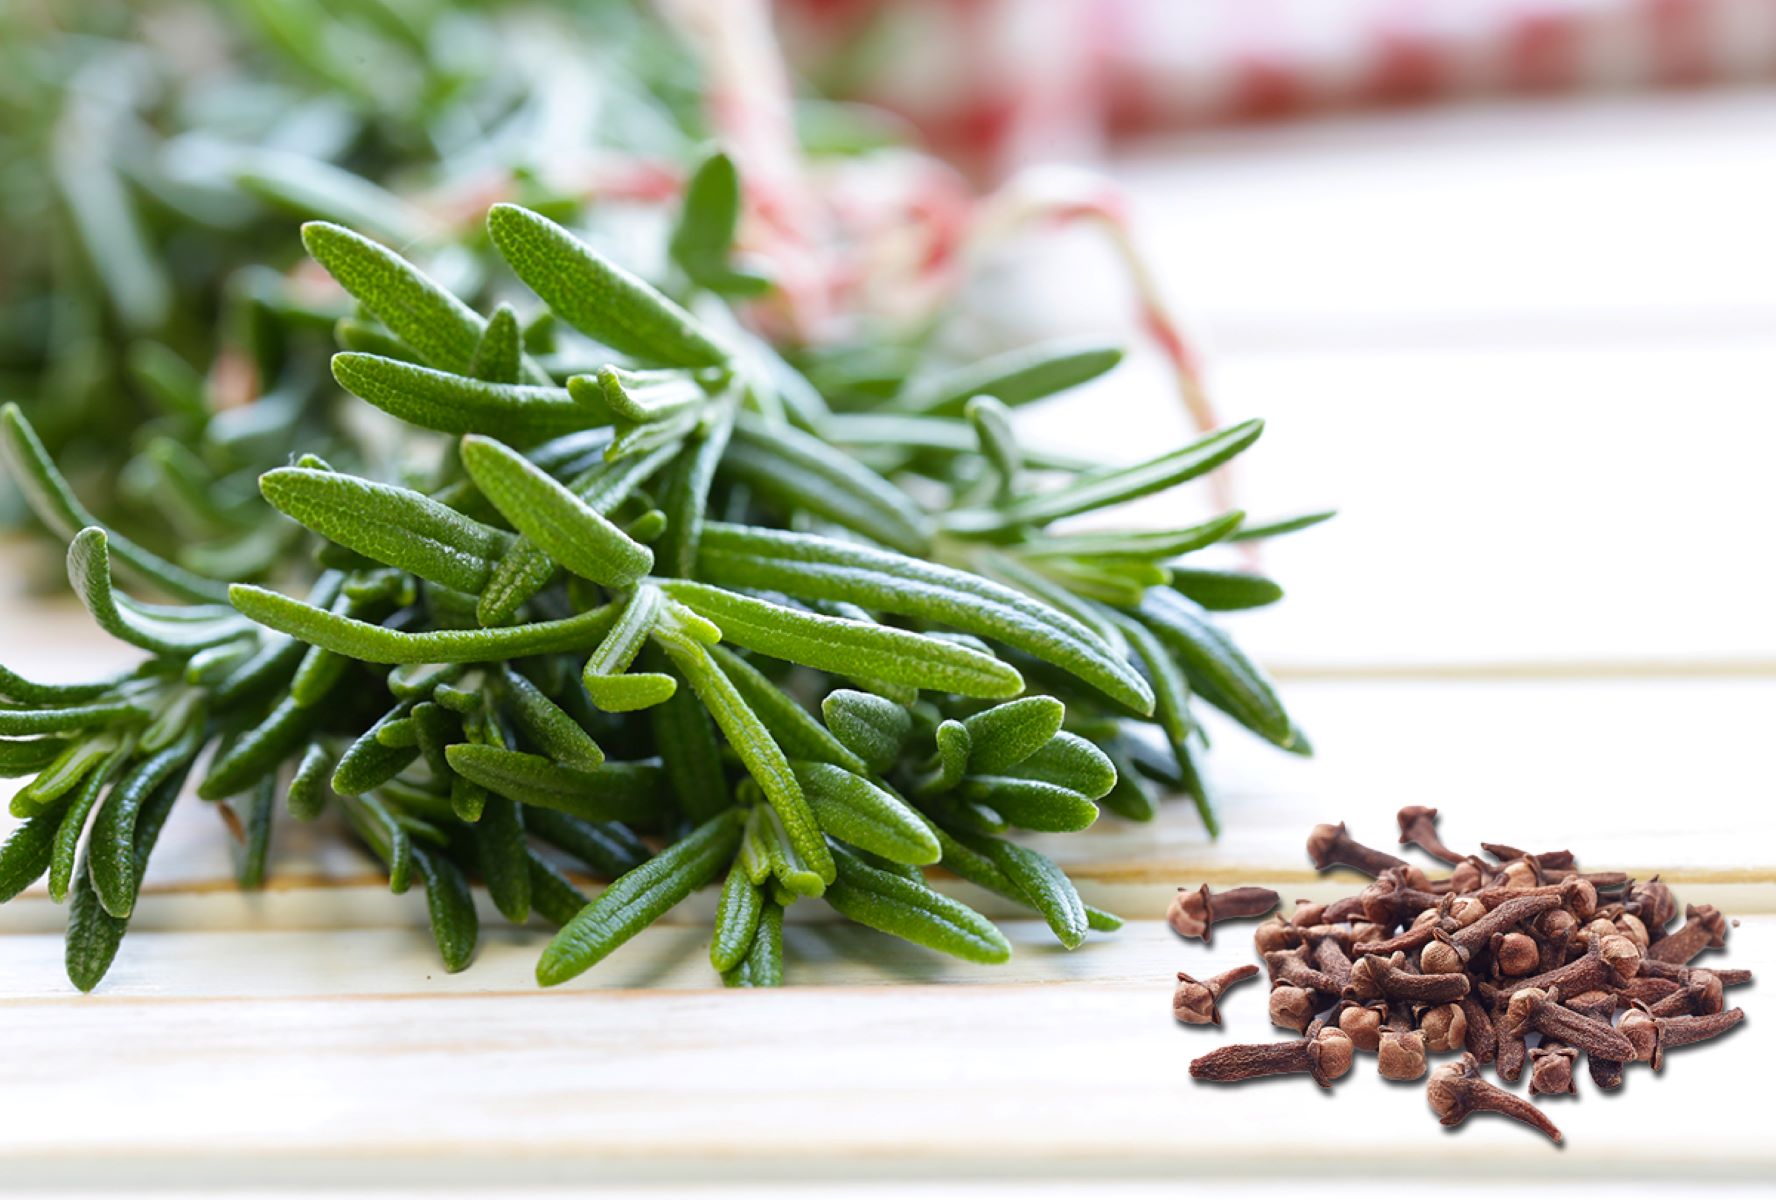 Discover The Incredible Hair Growth Benefits Of Rosemary And Cloves!